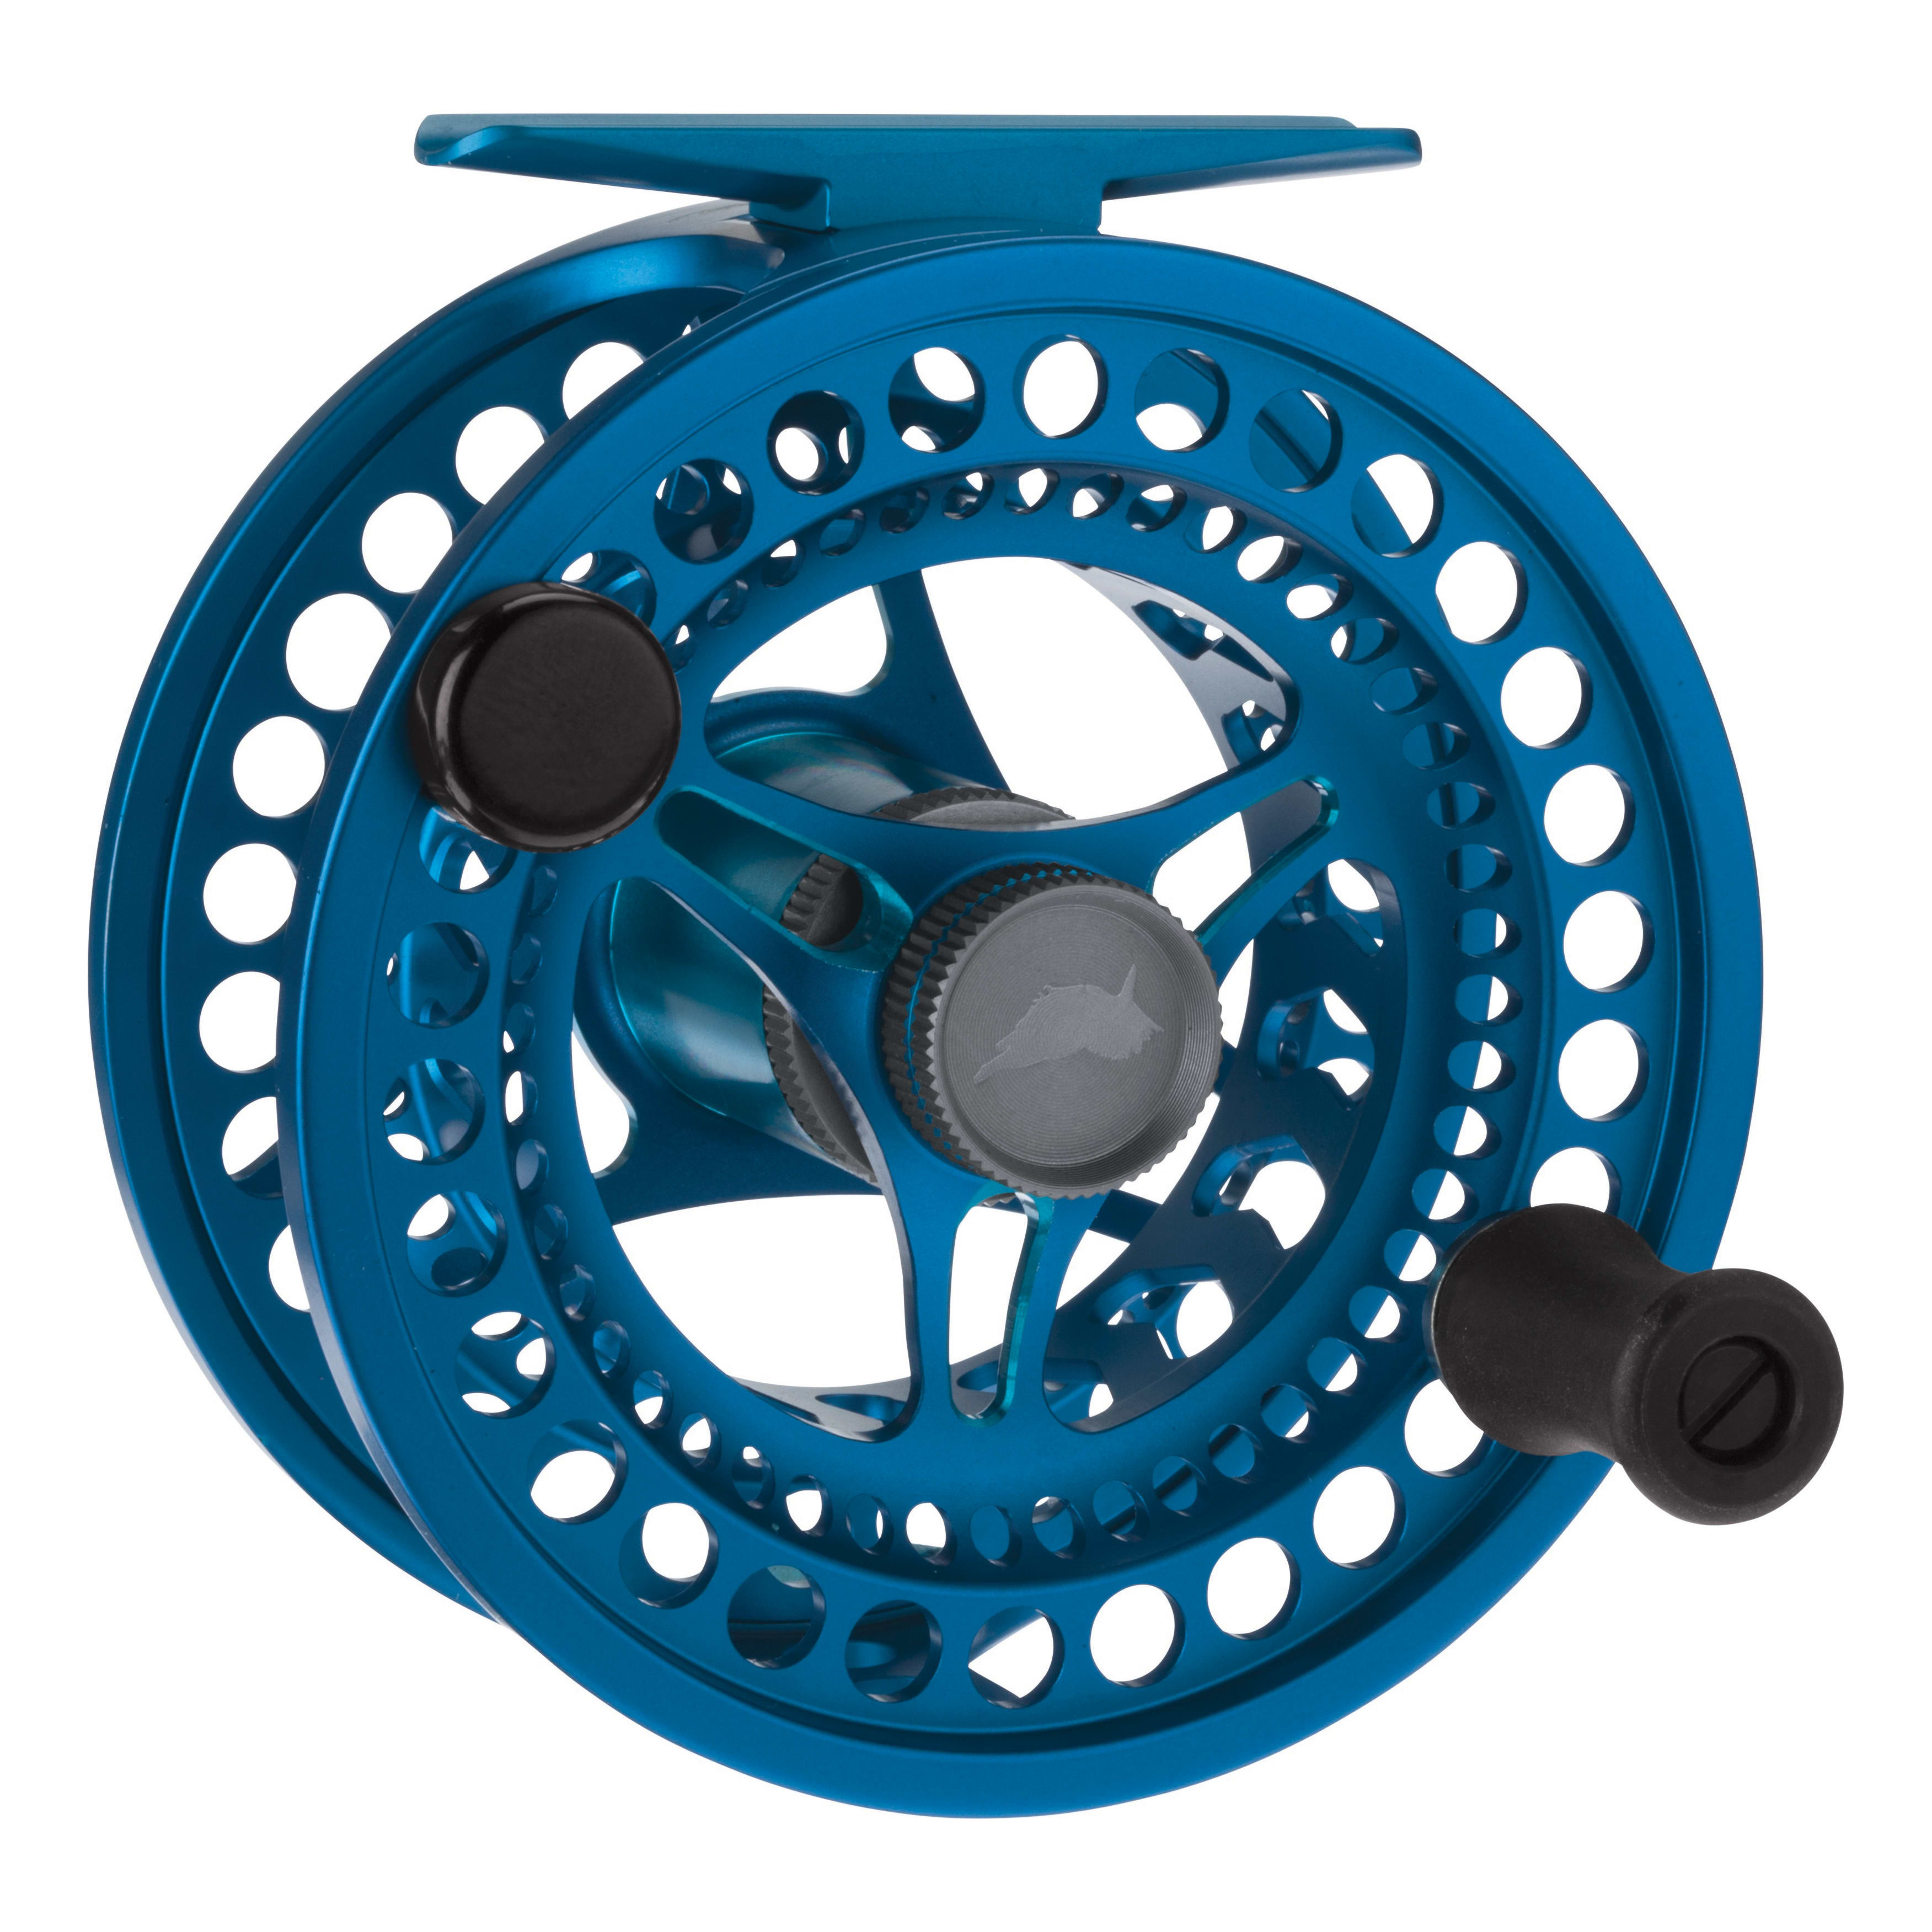 White River Fly Shop® Kingfisher Fly Reel